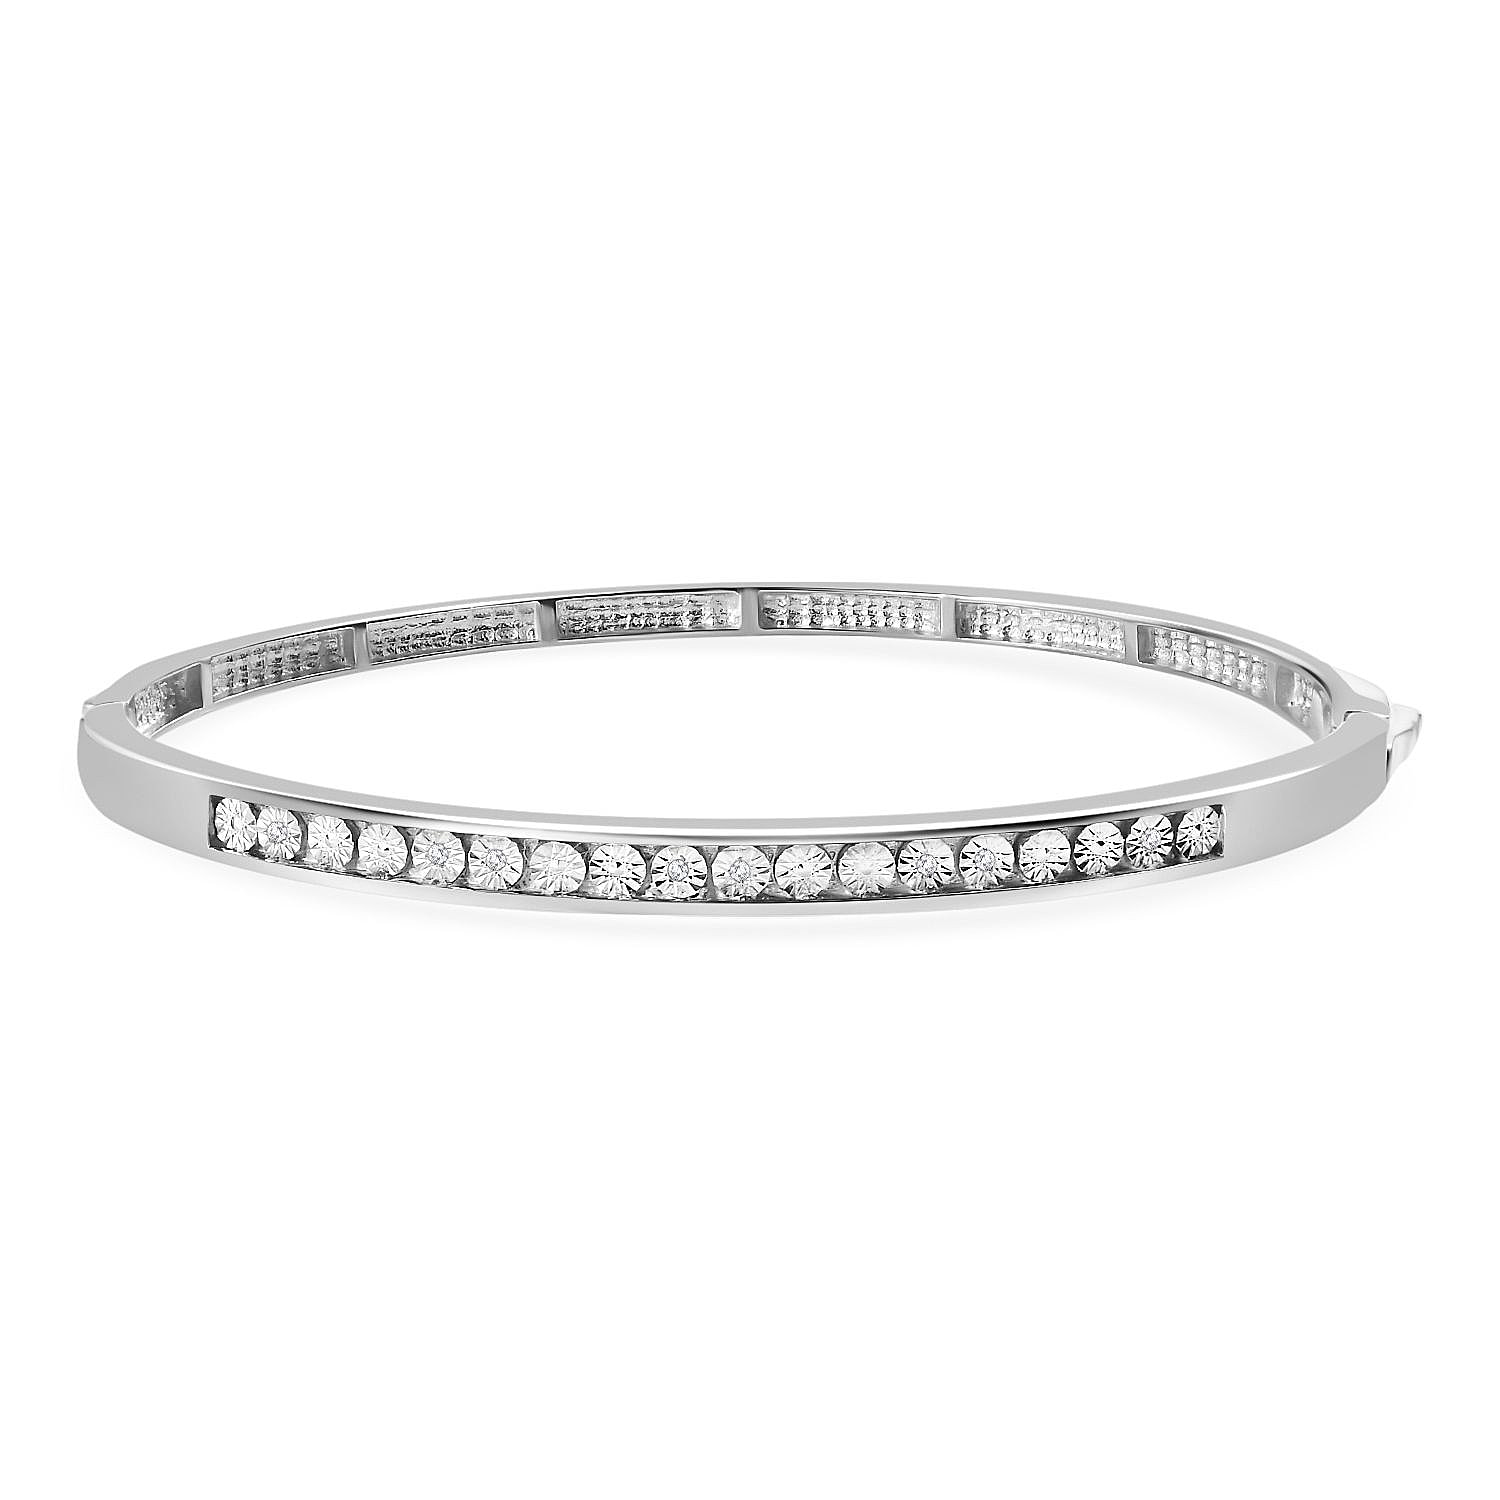 One Time Deal- Diamond Tennis Silver Plated Bangle Size (7.5) LOWEST EVER PRICE